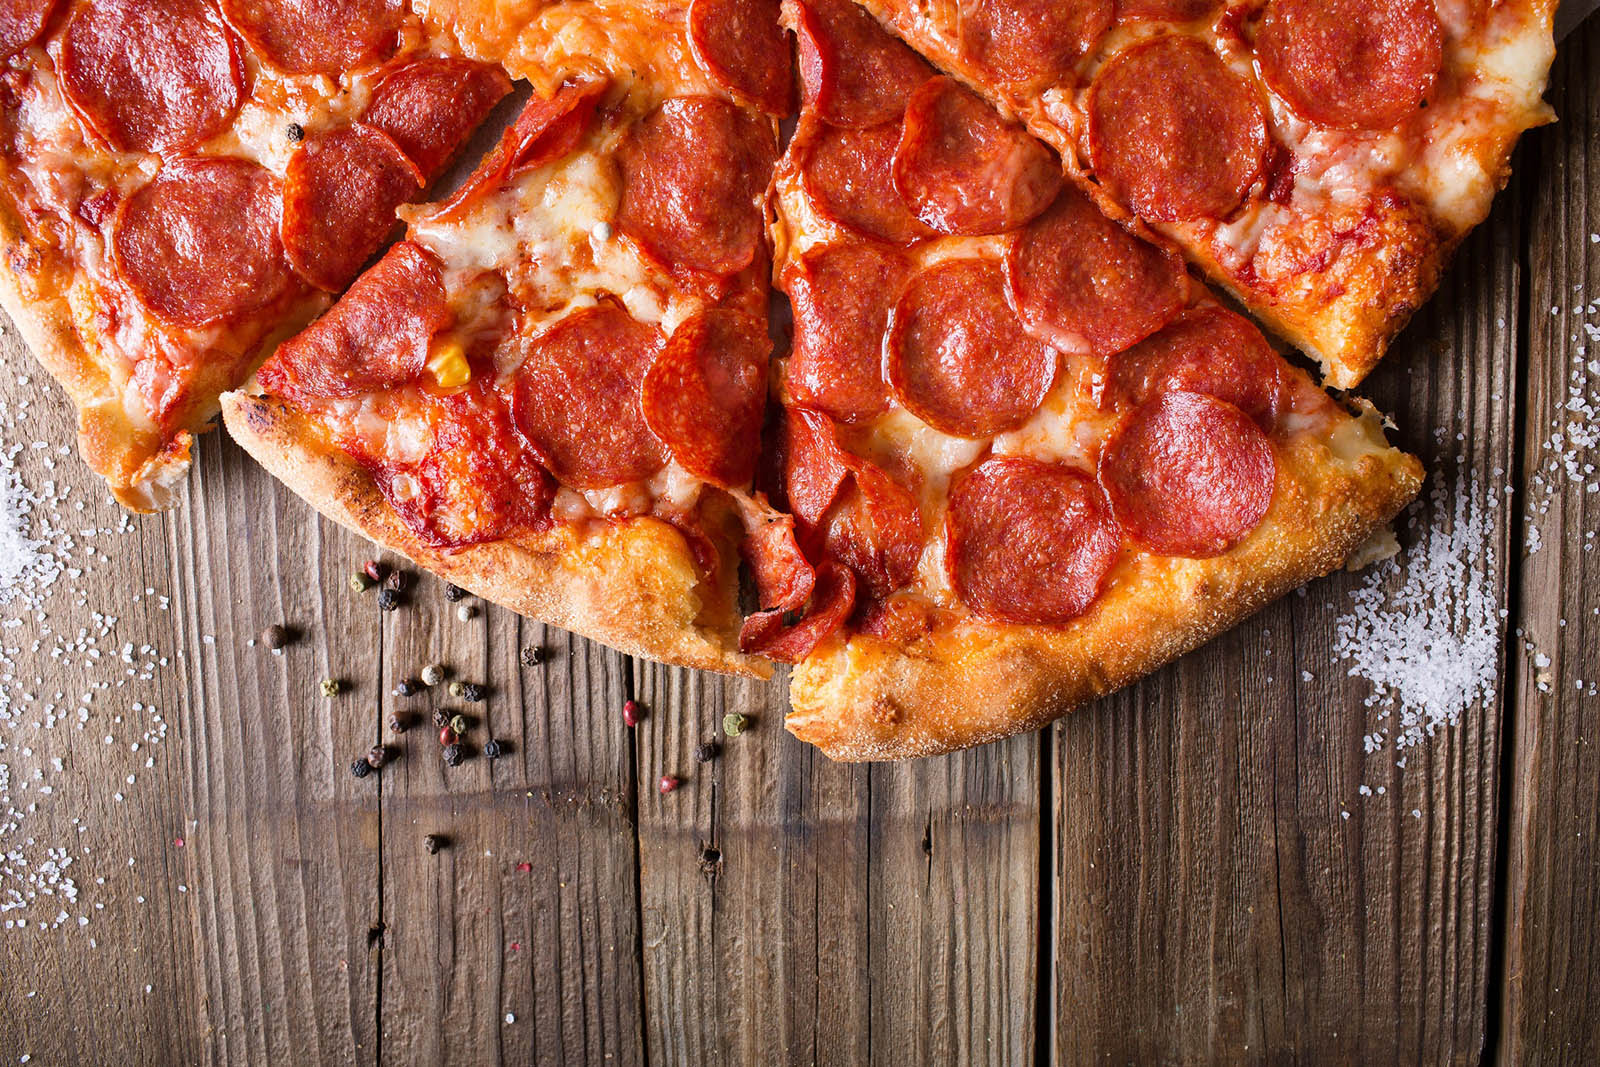 I Bet We Can Guess What Month You Were Born in Based on Your Food Choices Pepperoni Pizza